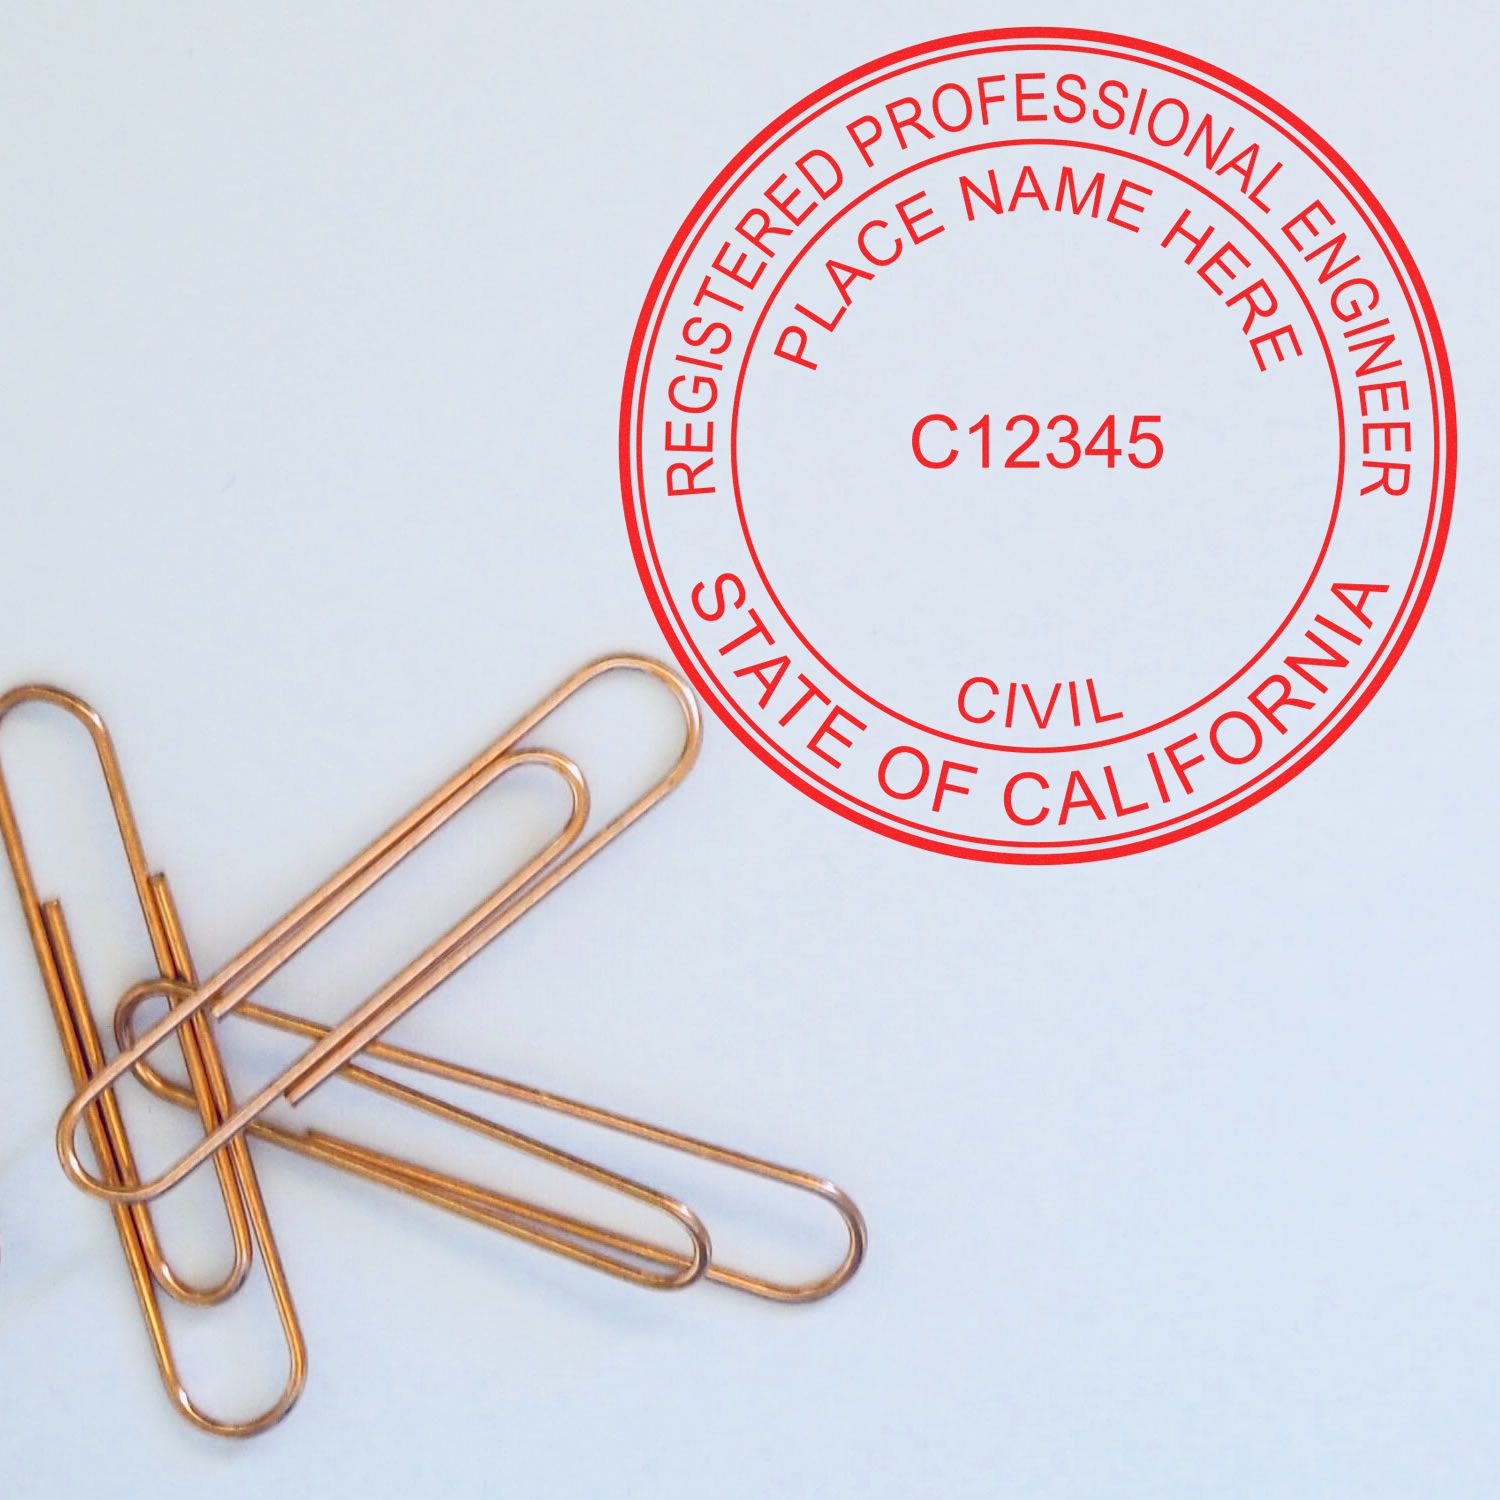 The main image for the California Professional Engineer Seal Stamp depicting a sample of the imprint and electronic files